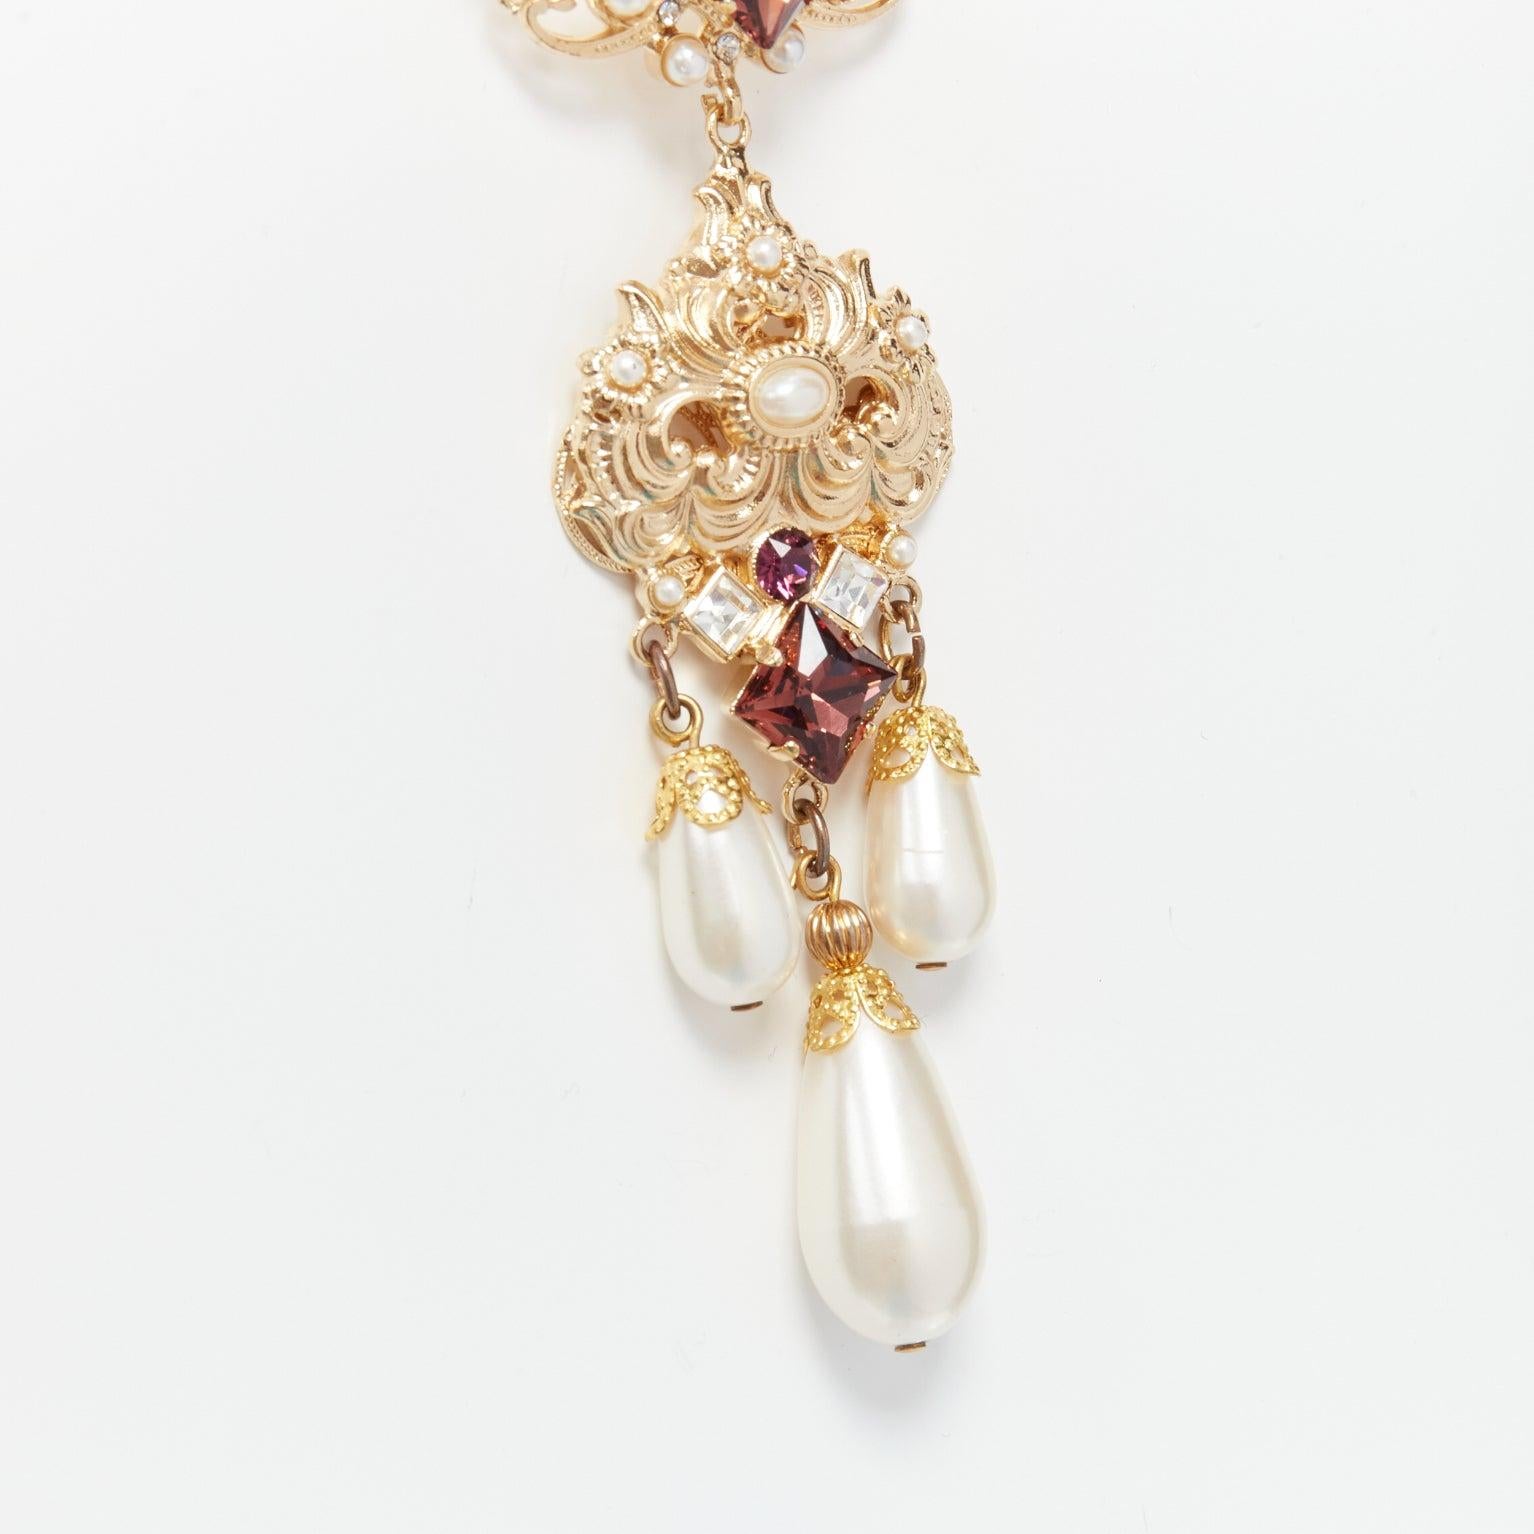 rare DOLCE GABBANA gold tone sapphire rhinestone pearl pendent filigree necklace
Reference: TGAS/D00184
Brand: Dolce Gabbana
Designer: Domenico Dolce and Stefano Gabbana
Material: Metal, Faux Pearl, Plastic
Color: Gold, Pearl
Pattern: